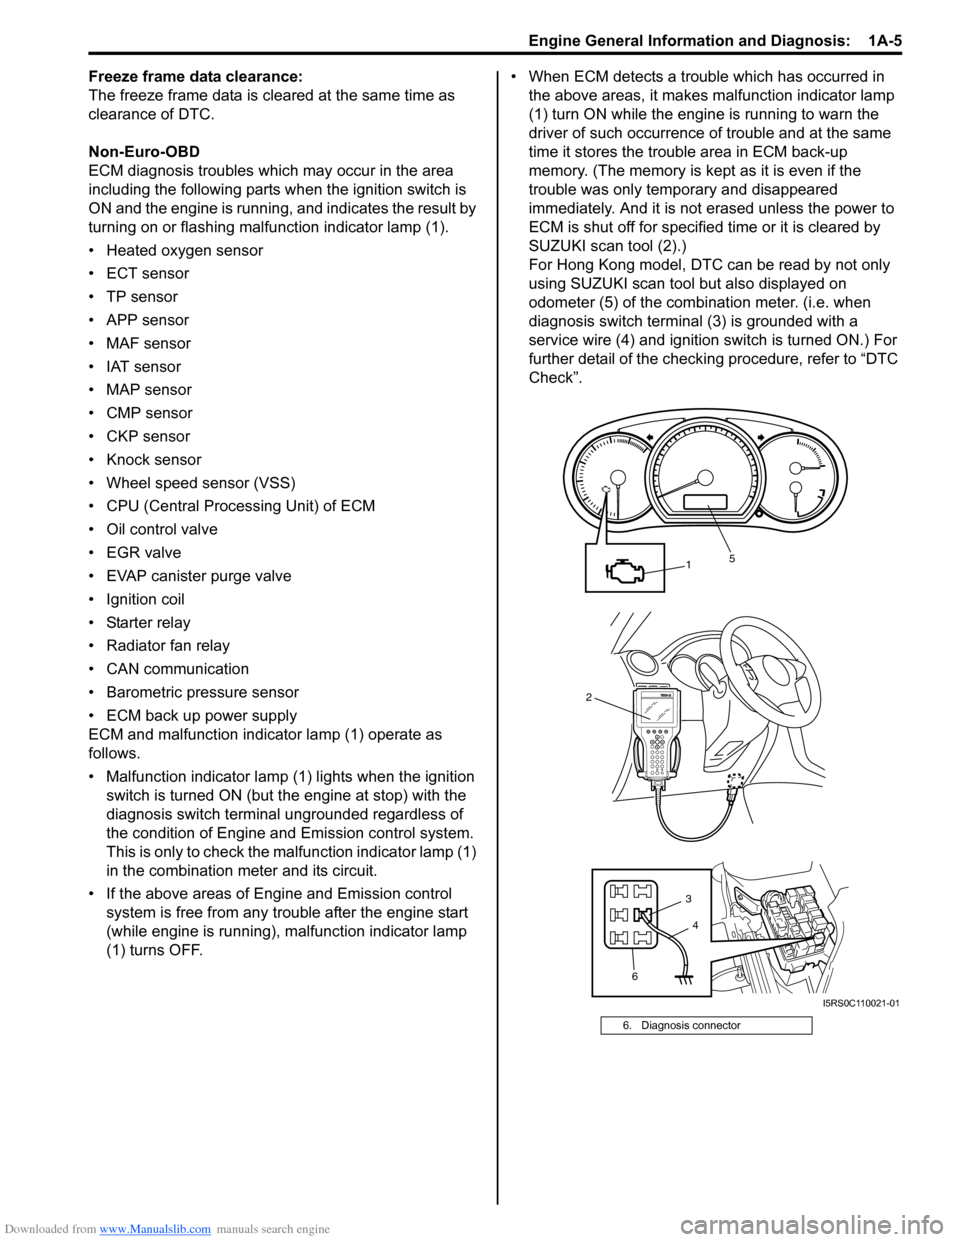 SUZUKI SWIFT 2004 2.G Service Workshop Manual Downloaded from www.Manualslib.com manuals search engine Engine General Information and Diagnosis:  1A-5
Freeze frame data clearance:
The freeze frame data is cleared at the same time as 
clearance of